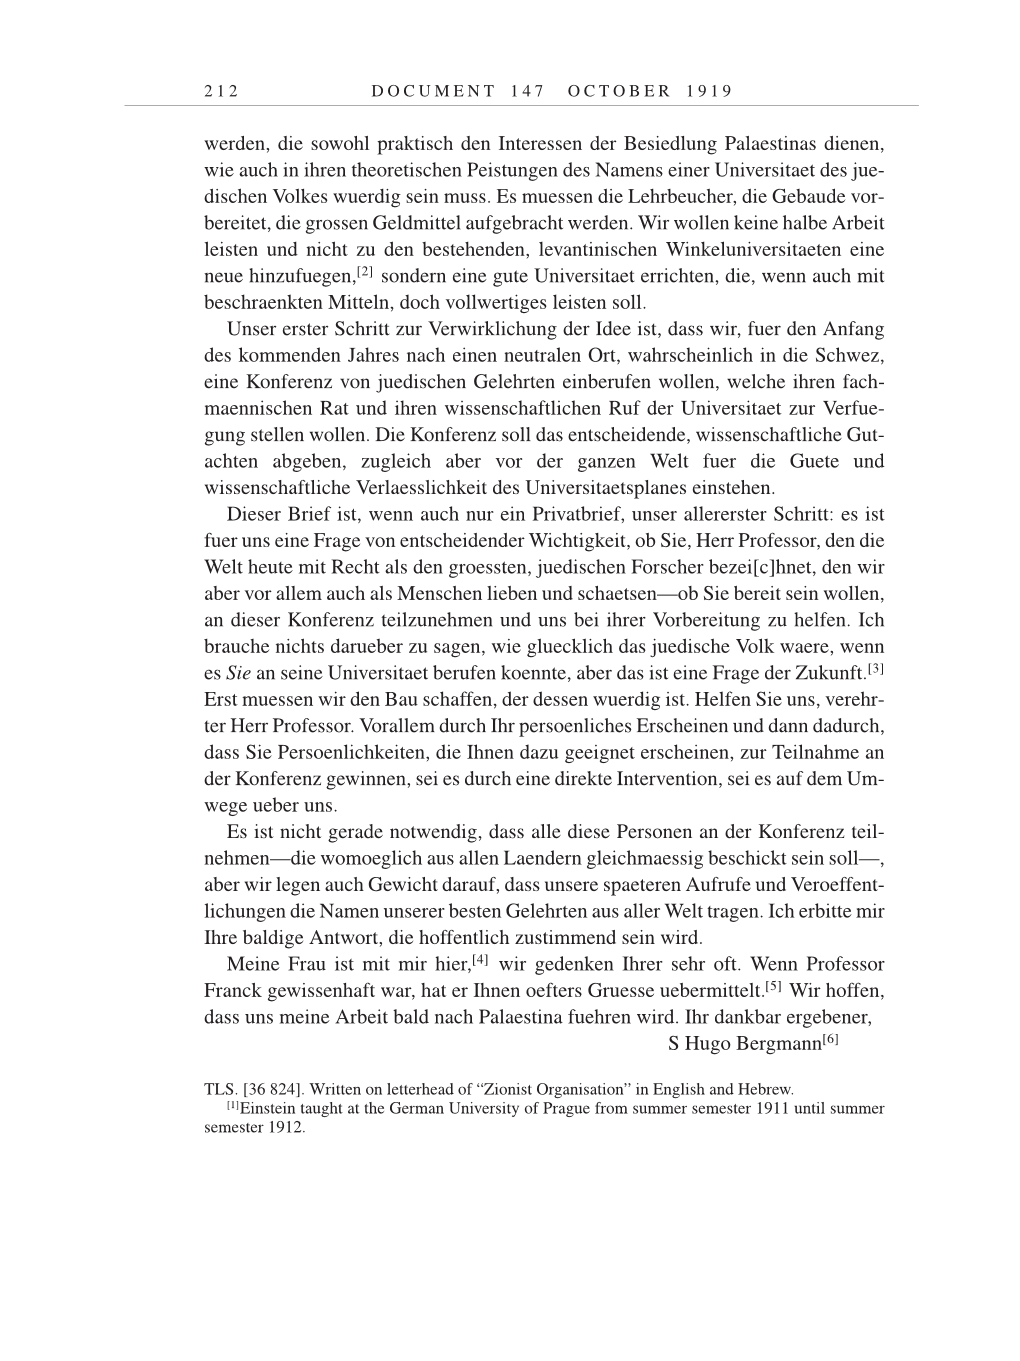 Volume 9: The Berlin Years: Correspondence January 1919-April 1920 page 212